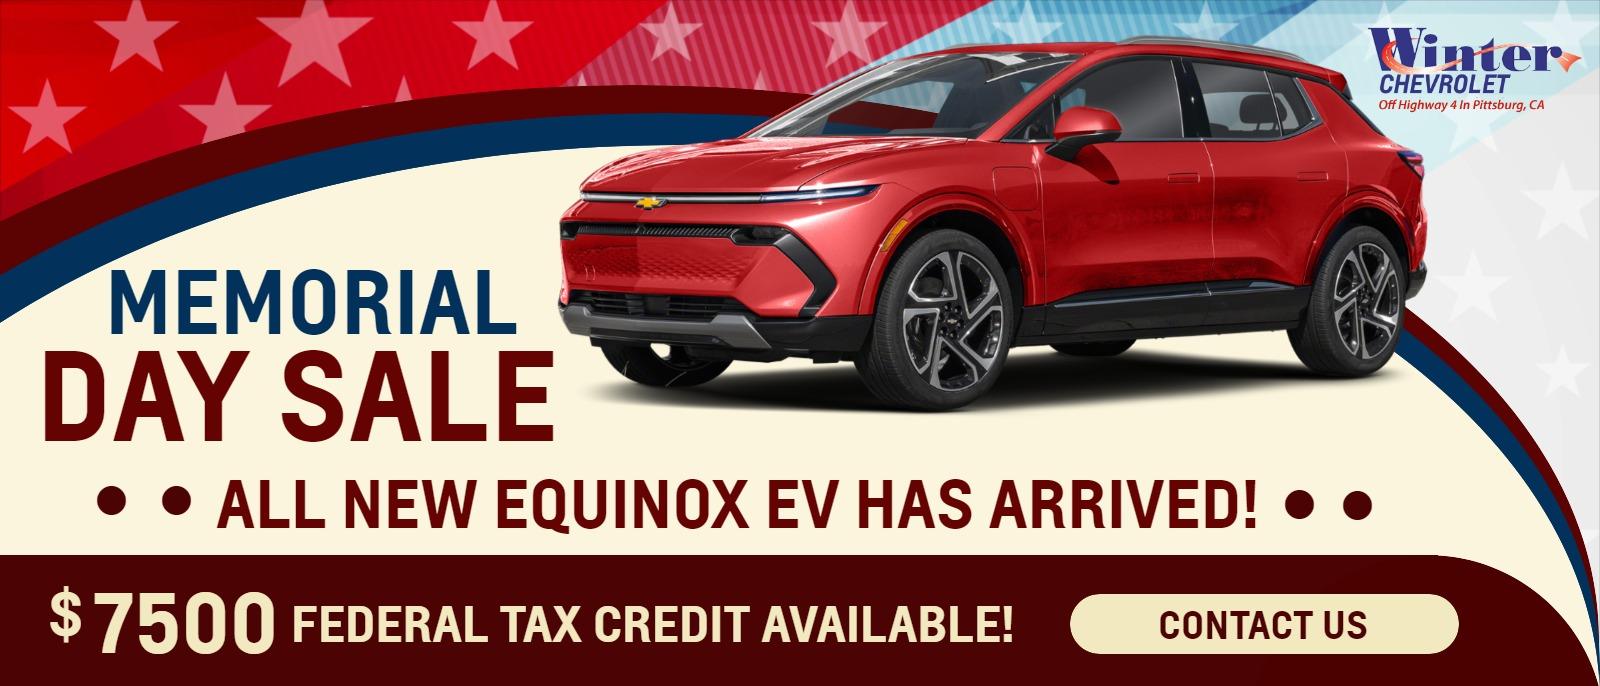 Memorial Day Sale

The ALL NEW Equinox EV has arrived!
$7500.00 Federal Tax Credit Available!